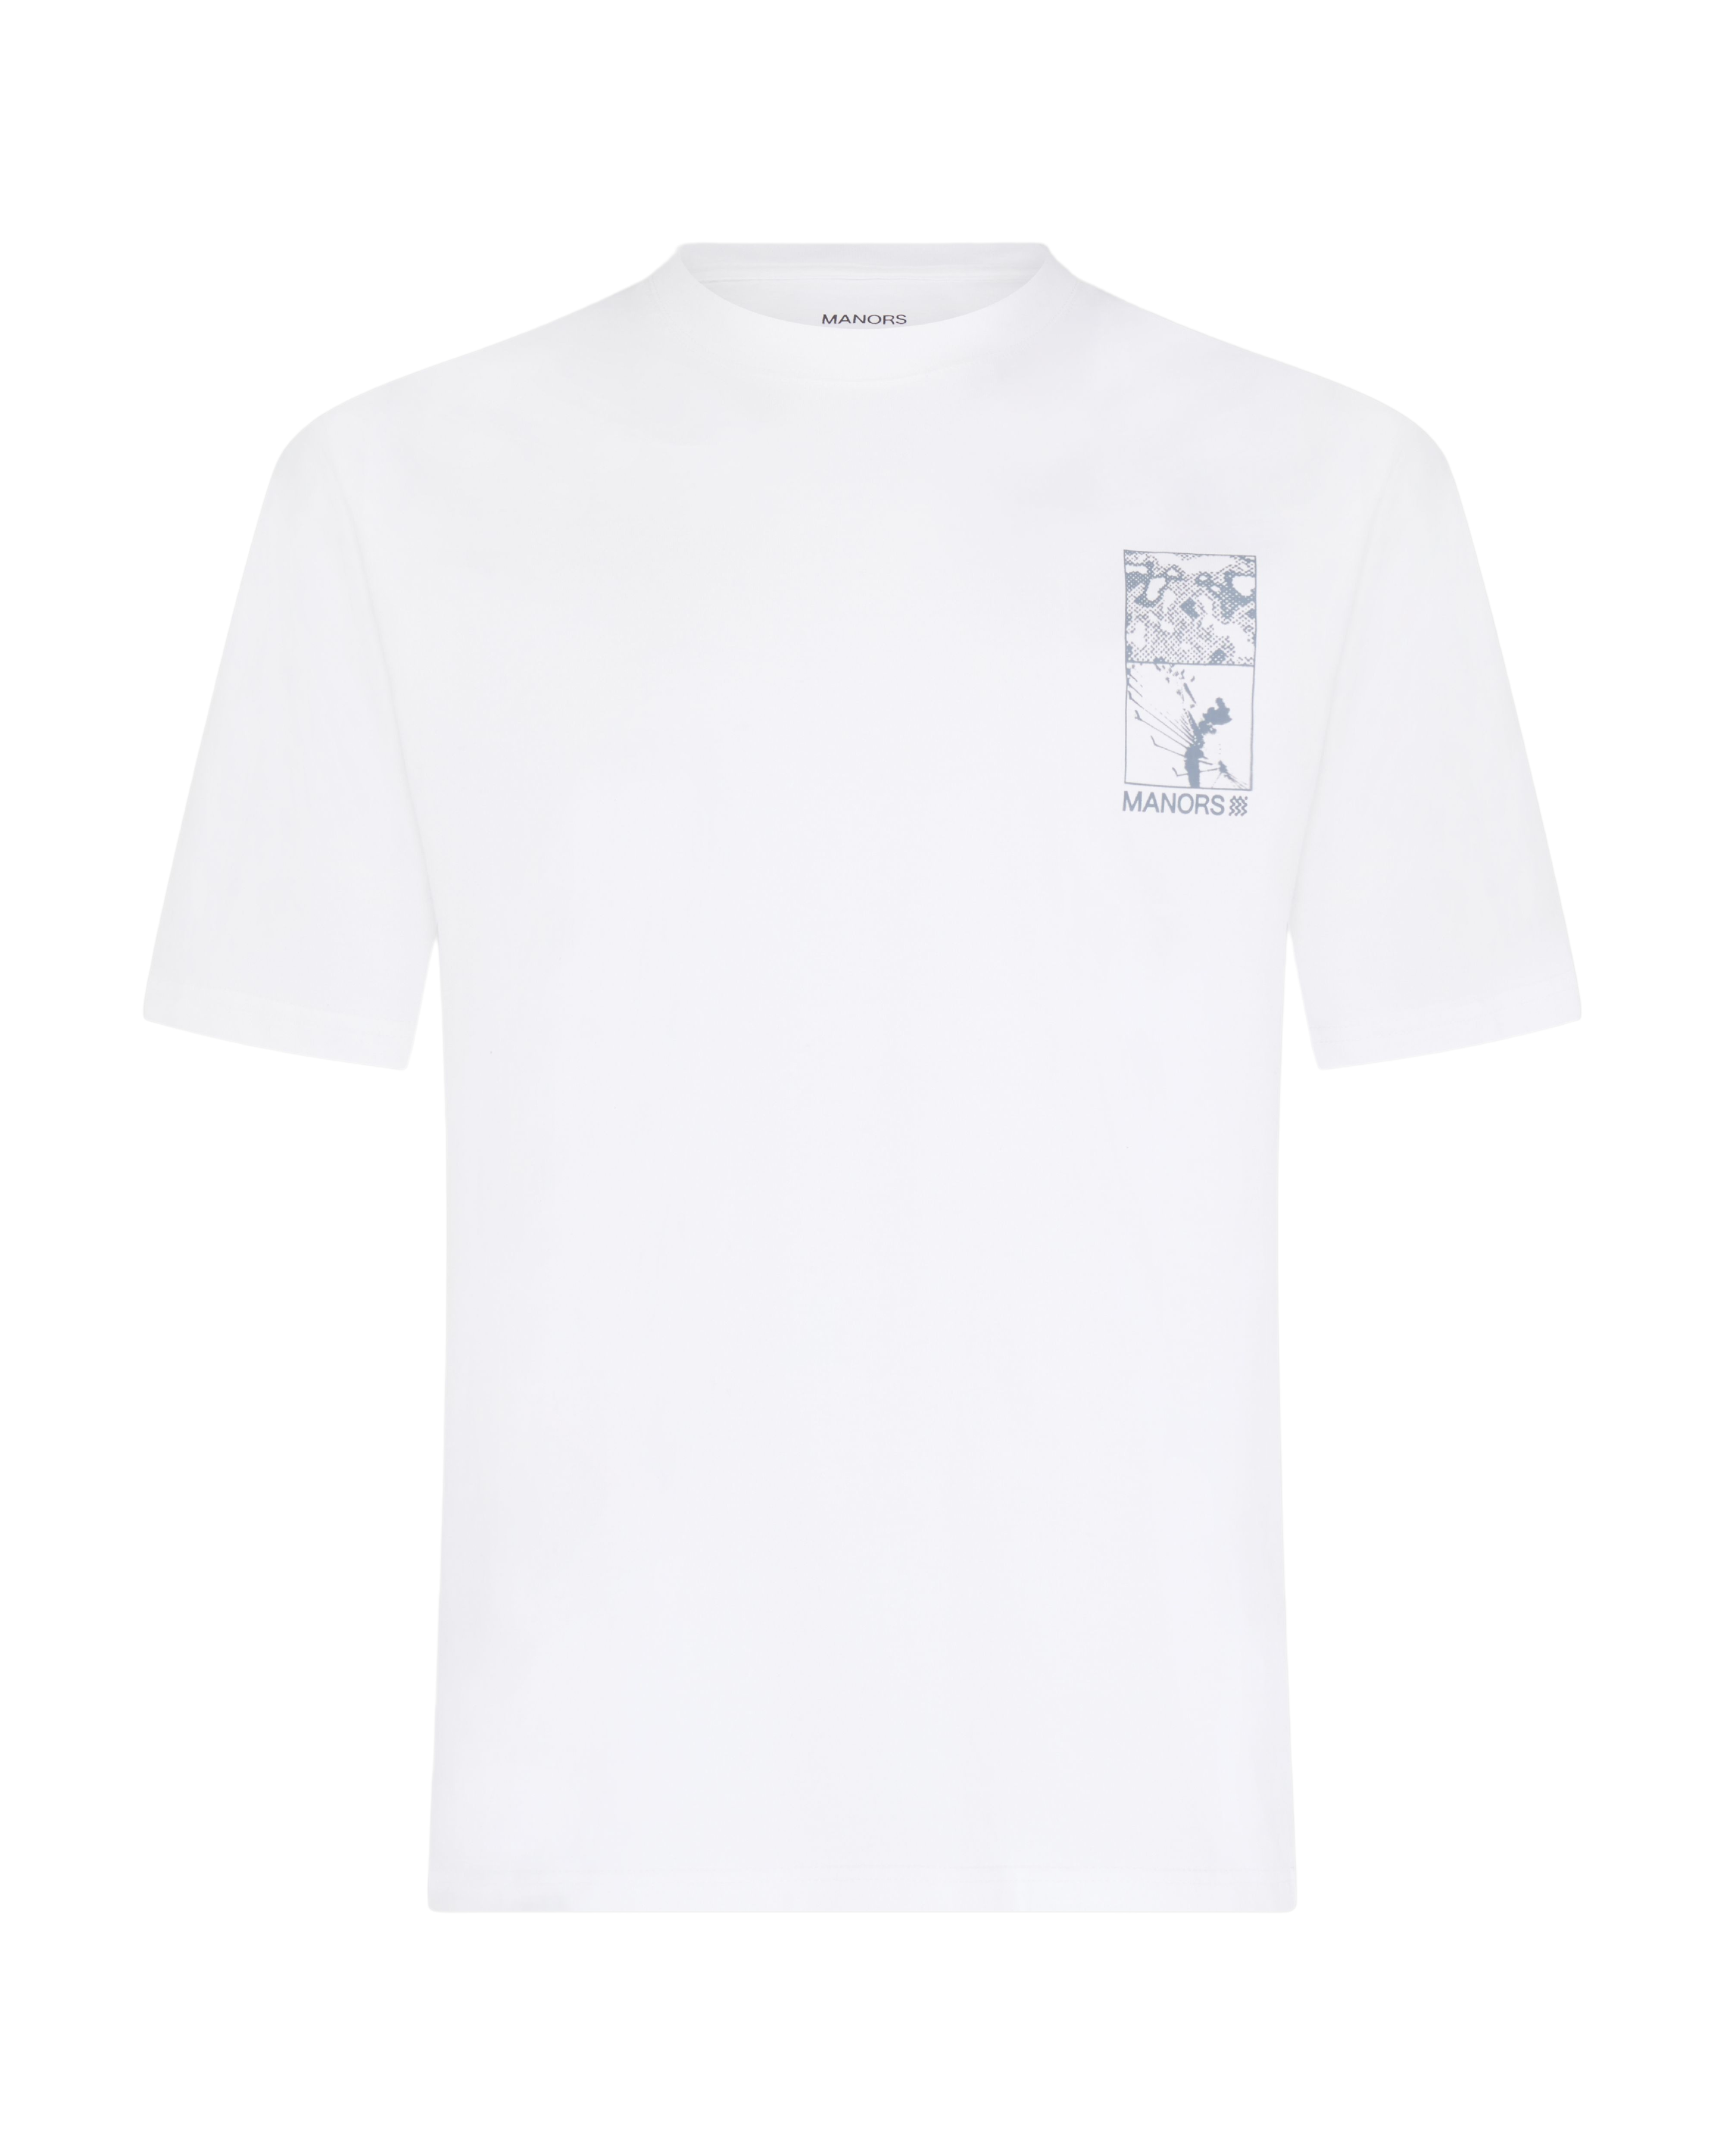 MANORS Men's Swing Thoughts T-Shirt